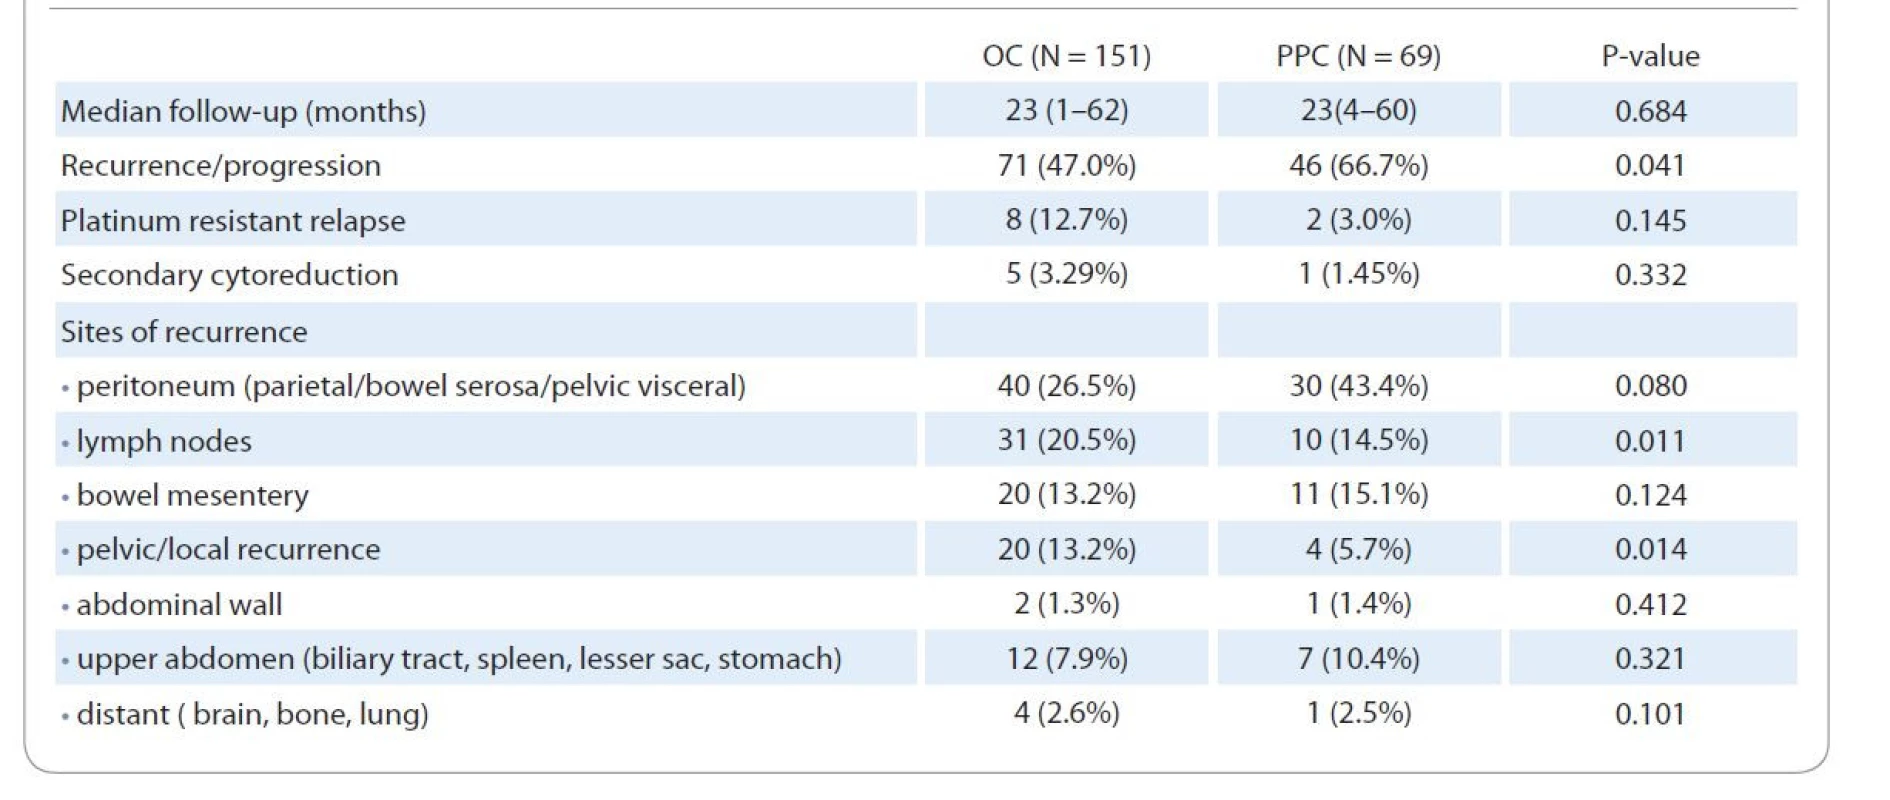 Univariate analysis comparing the features of disease recurrence in ovarian carcinoma and primary peritoneal
carcinoma.